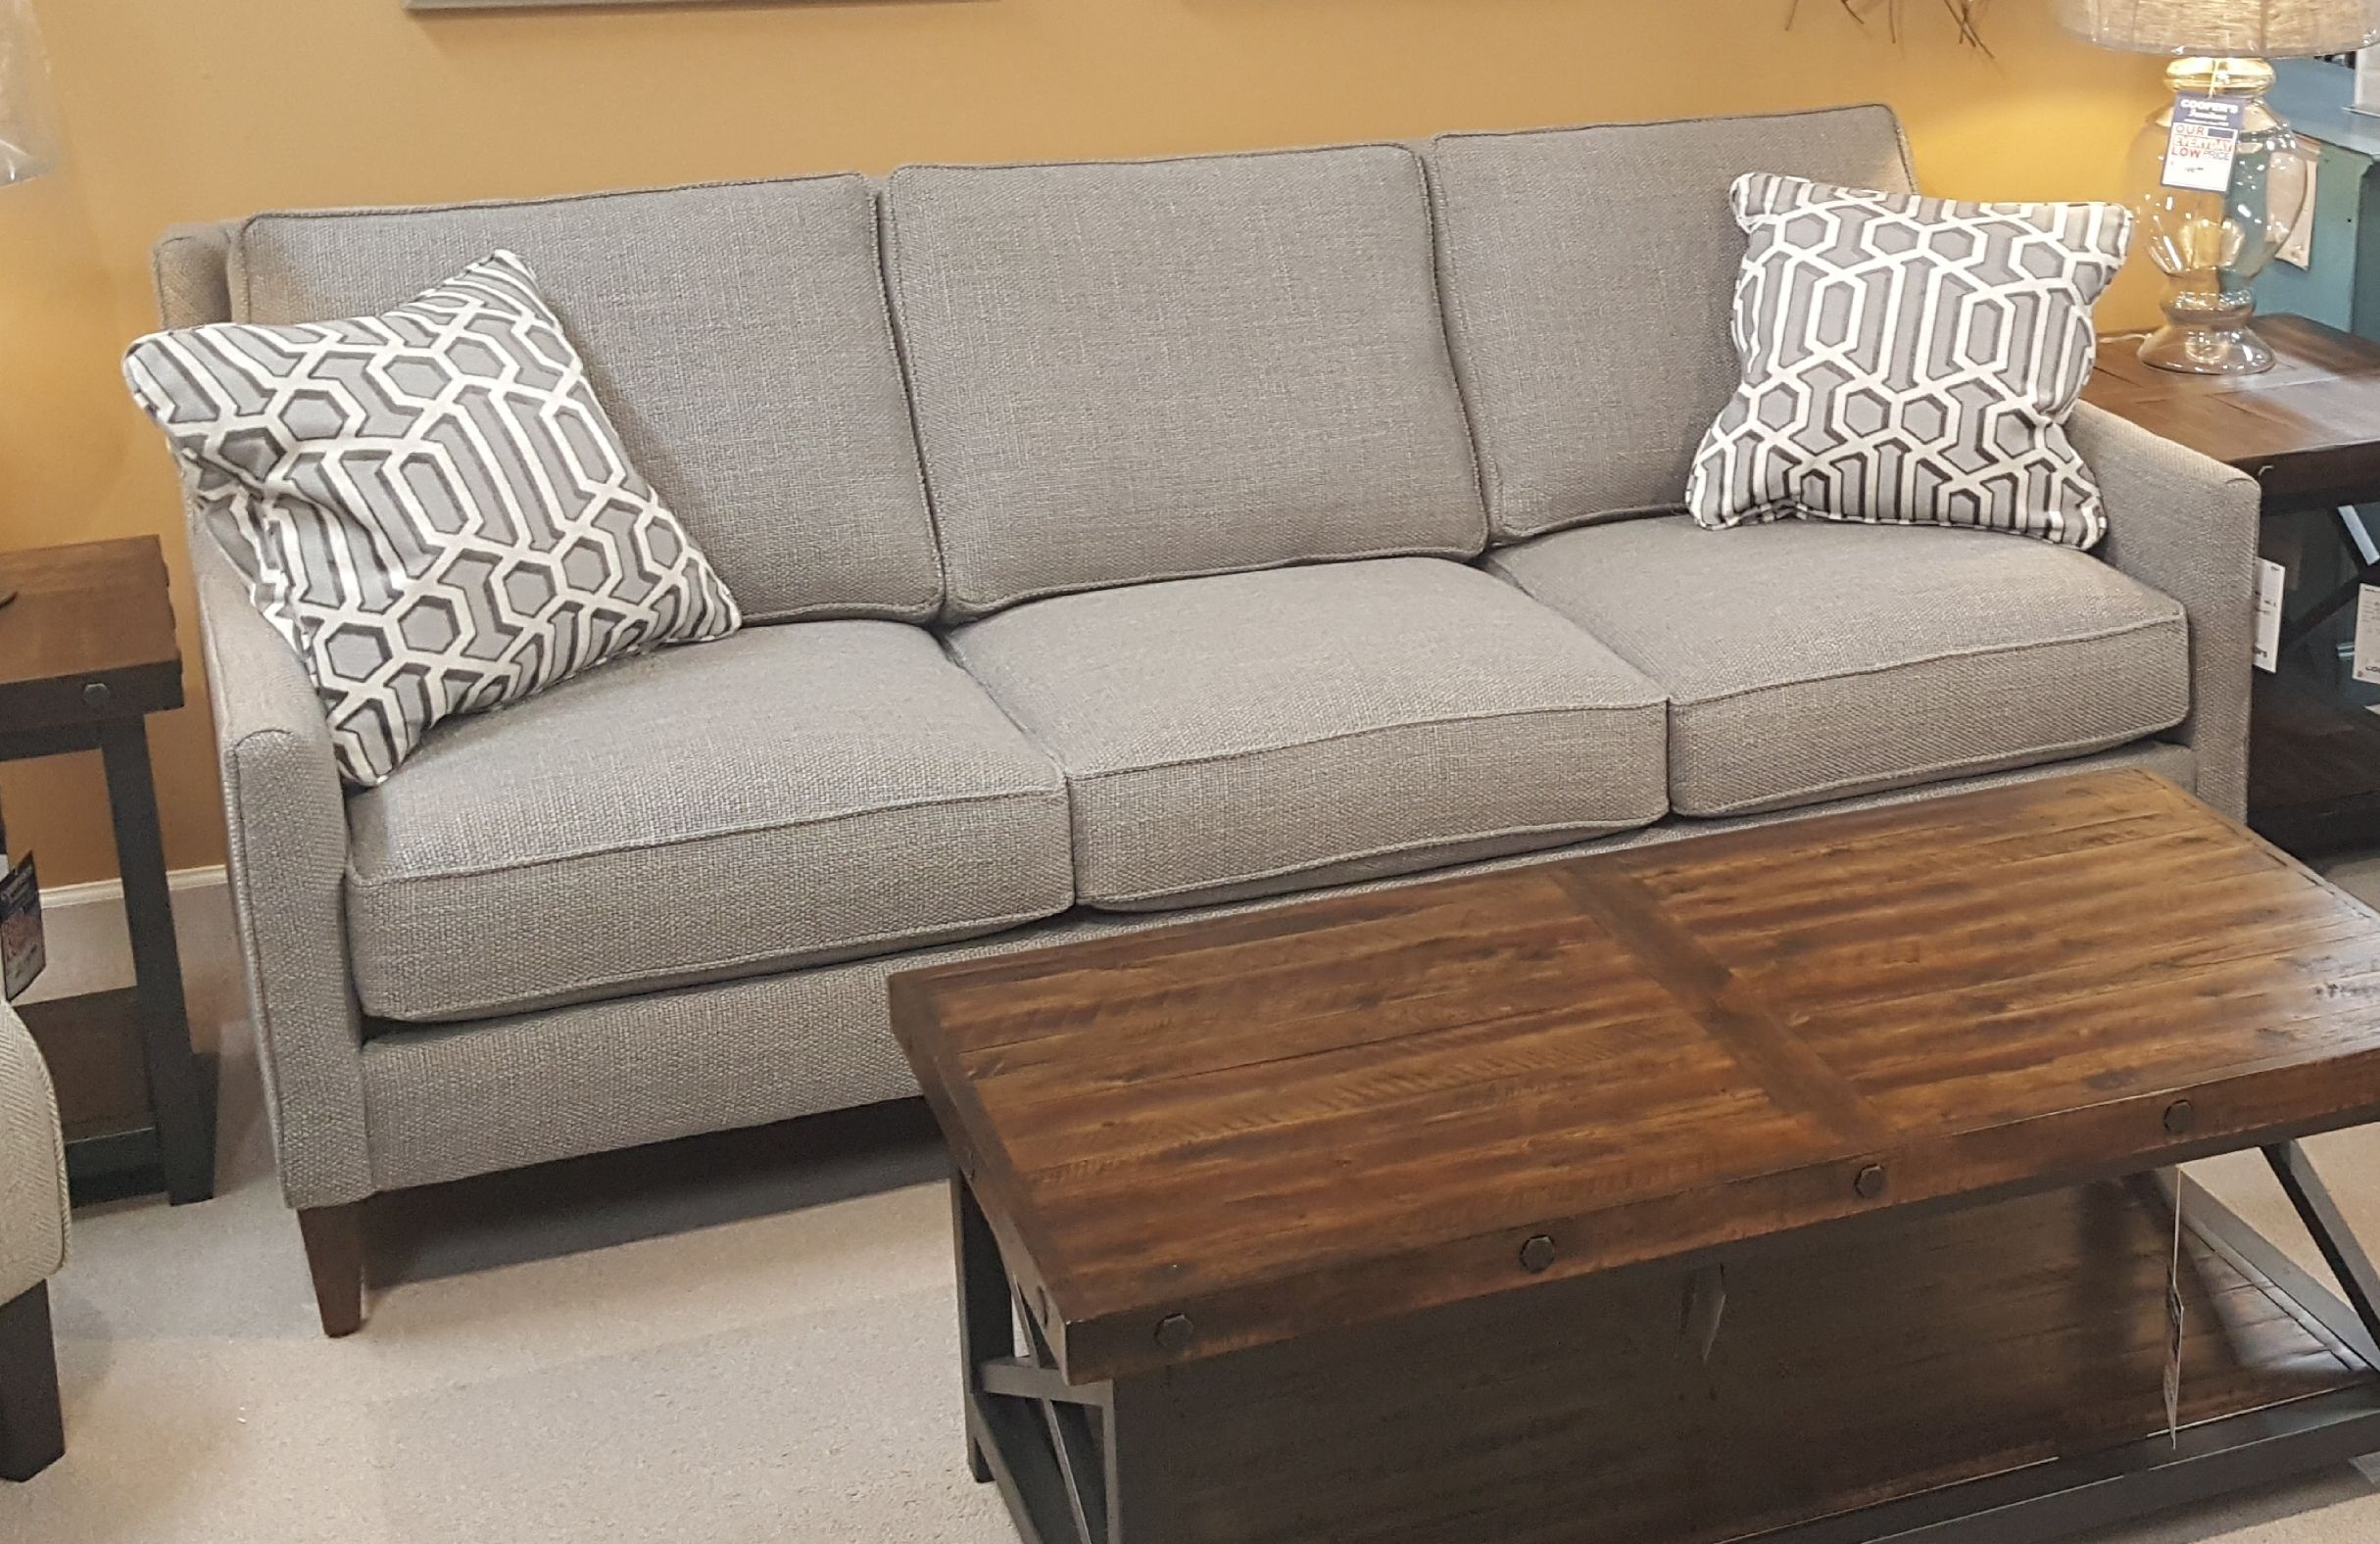 Living Room Furniture Cary Nc | Sofas, Recliners, Sectionals Throughout Durham Region Sectional Sofas (View 3 of 10)